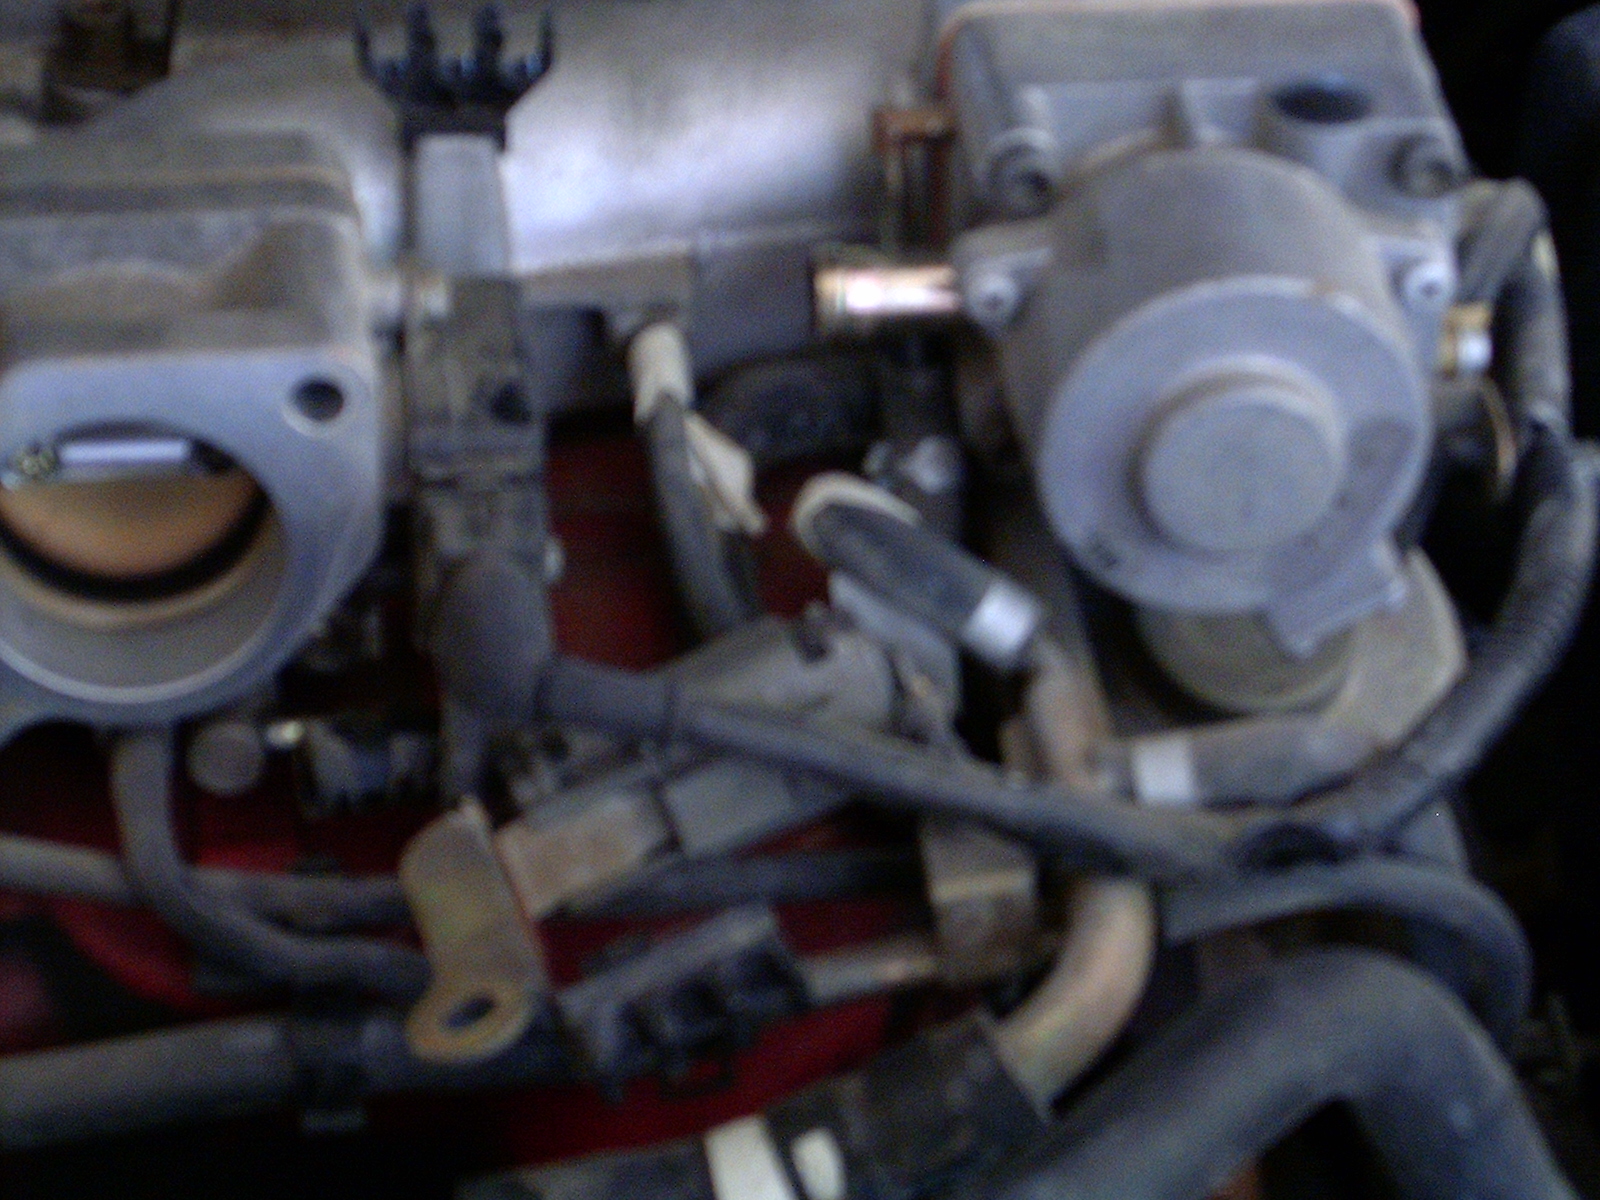 1995 Nissan maxima fuel injector removal #3